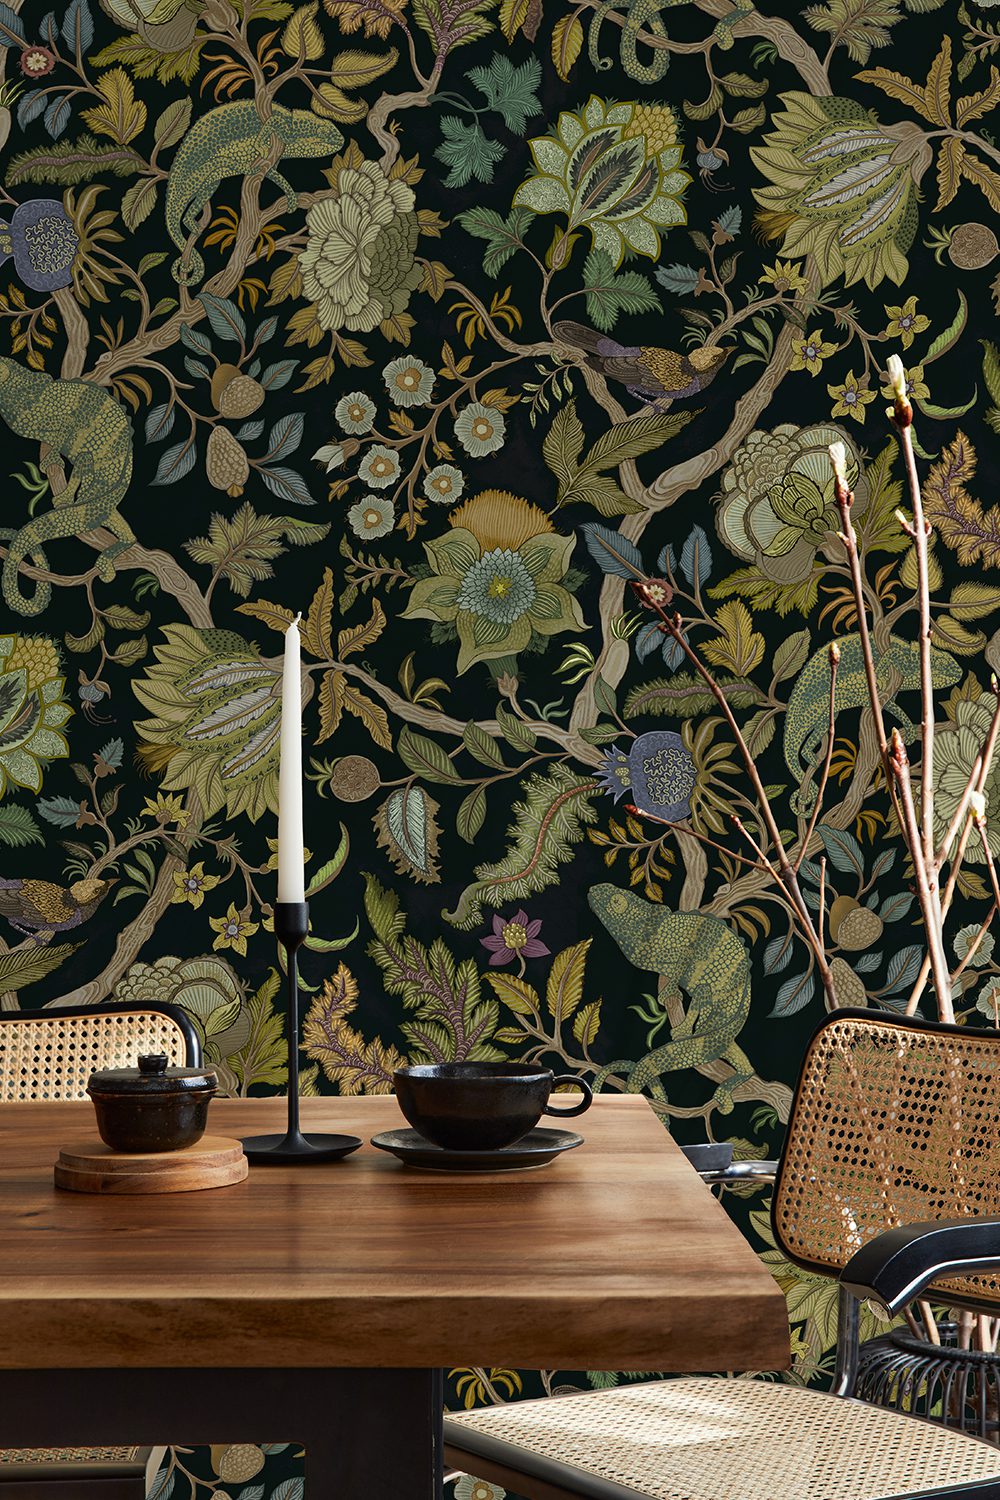 Josephine-munsey-wallpapers-interiors-chameleon-trail-floral-black-green-wallpaper-kitchen-wicker-chairs